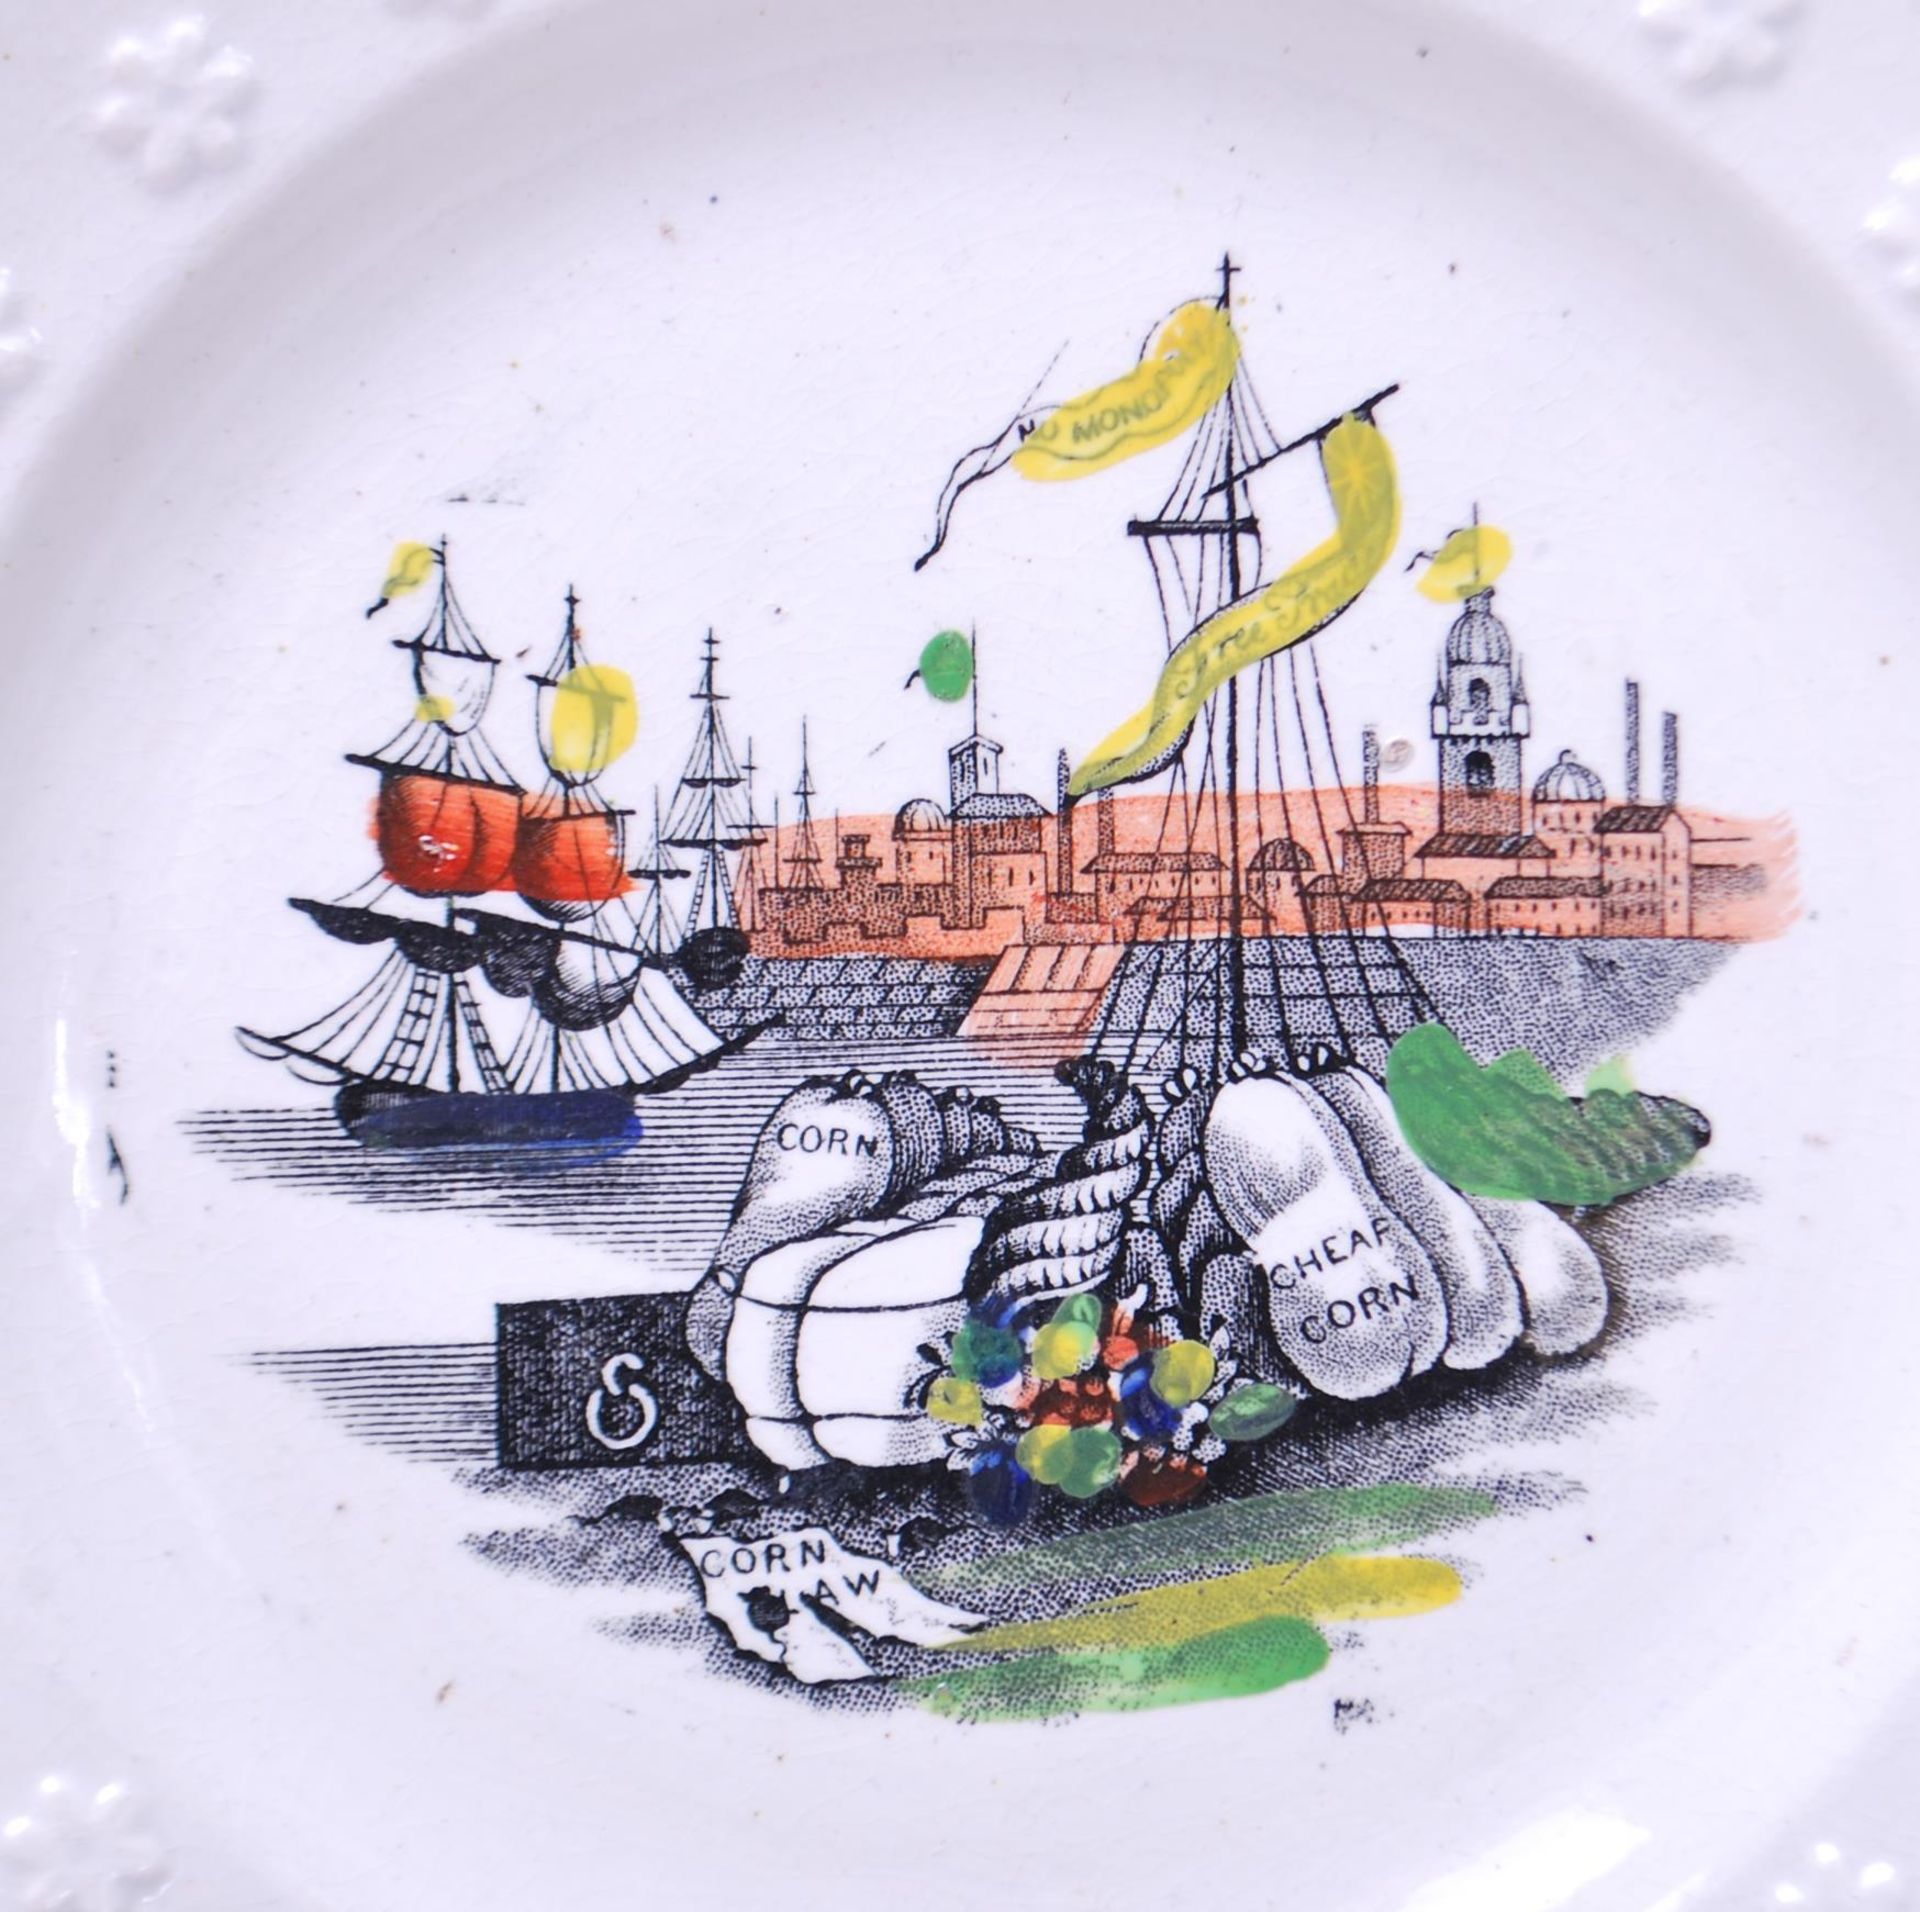 ANTIQUE 19TH CNETURY SUTHERLAND LUSTRE JUG TOGETHER WITH A CHILDS POLITICAL PLATE - Image 8 of 8